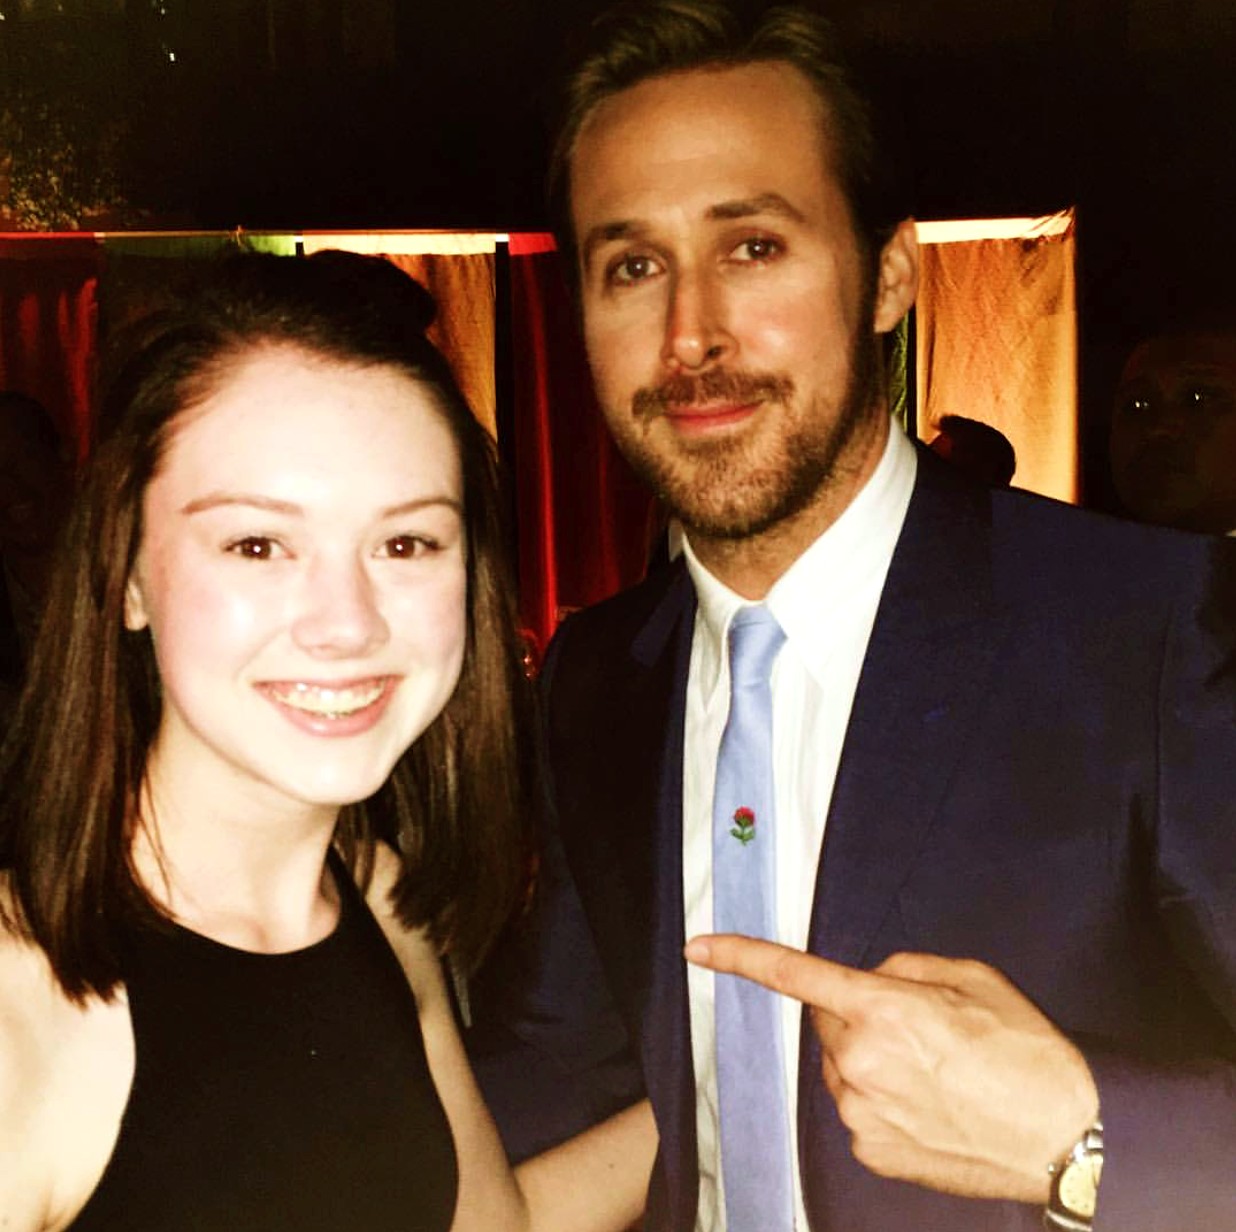 The Nice Guys, movie premiere after party, Ryan Gosling